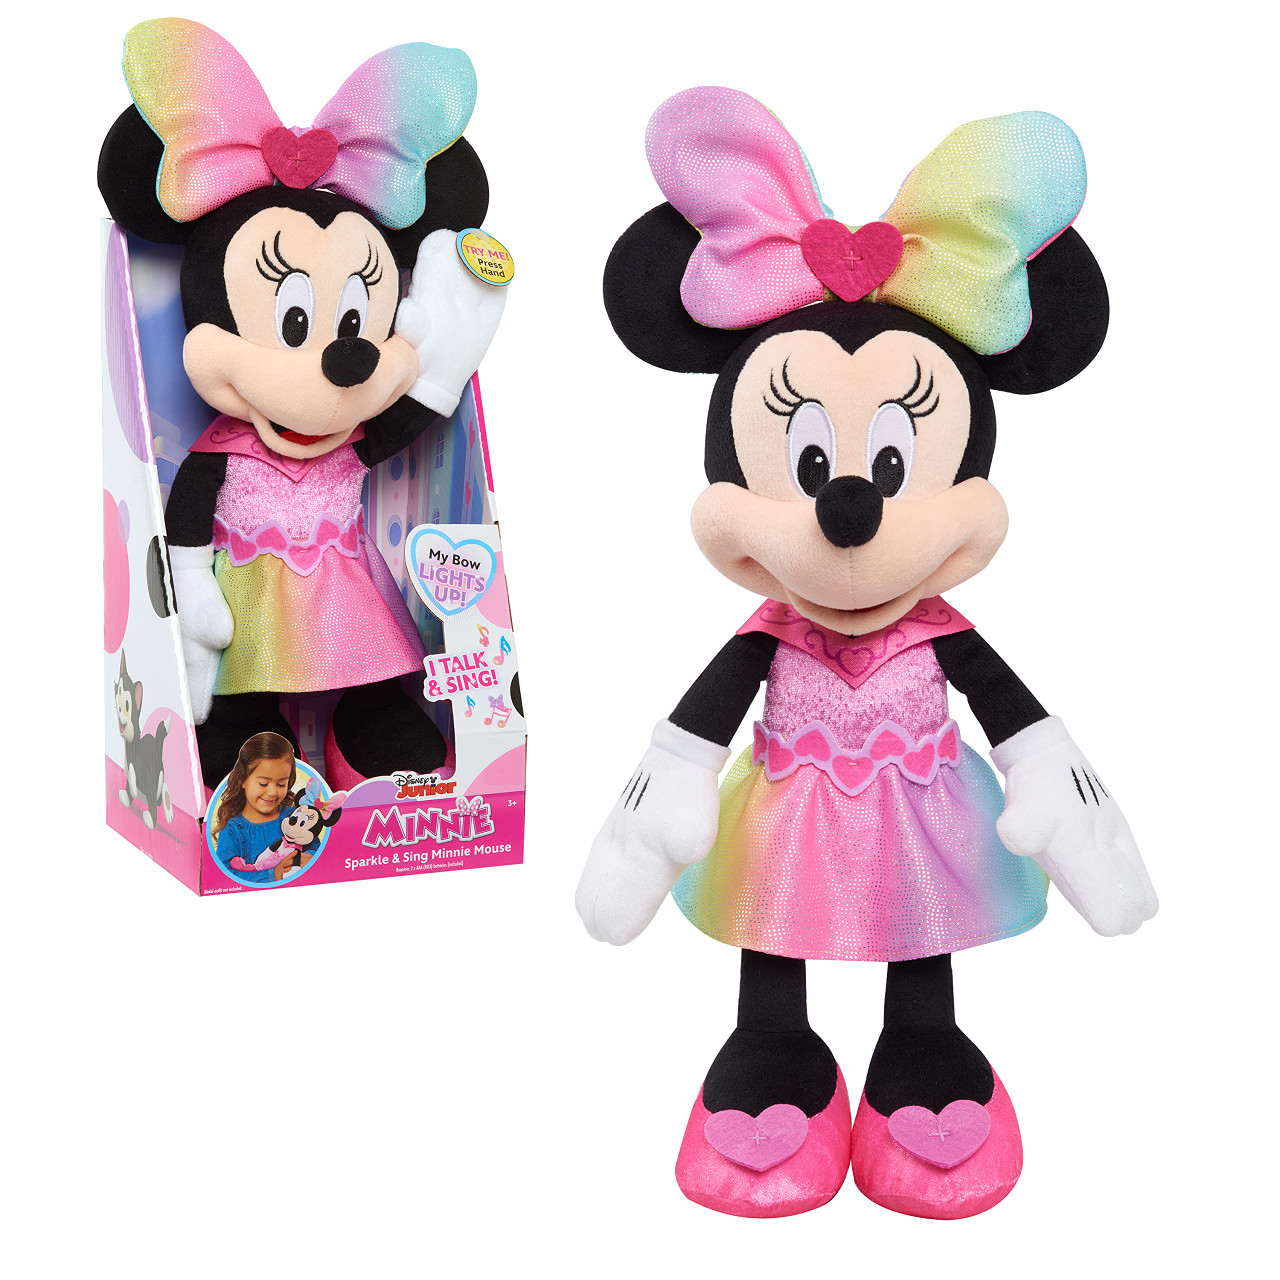 Disney Junior Mickey Mouse and Minnie Mouse Beanbag Plushie 2-Pack Stuffed Anim